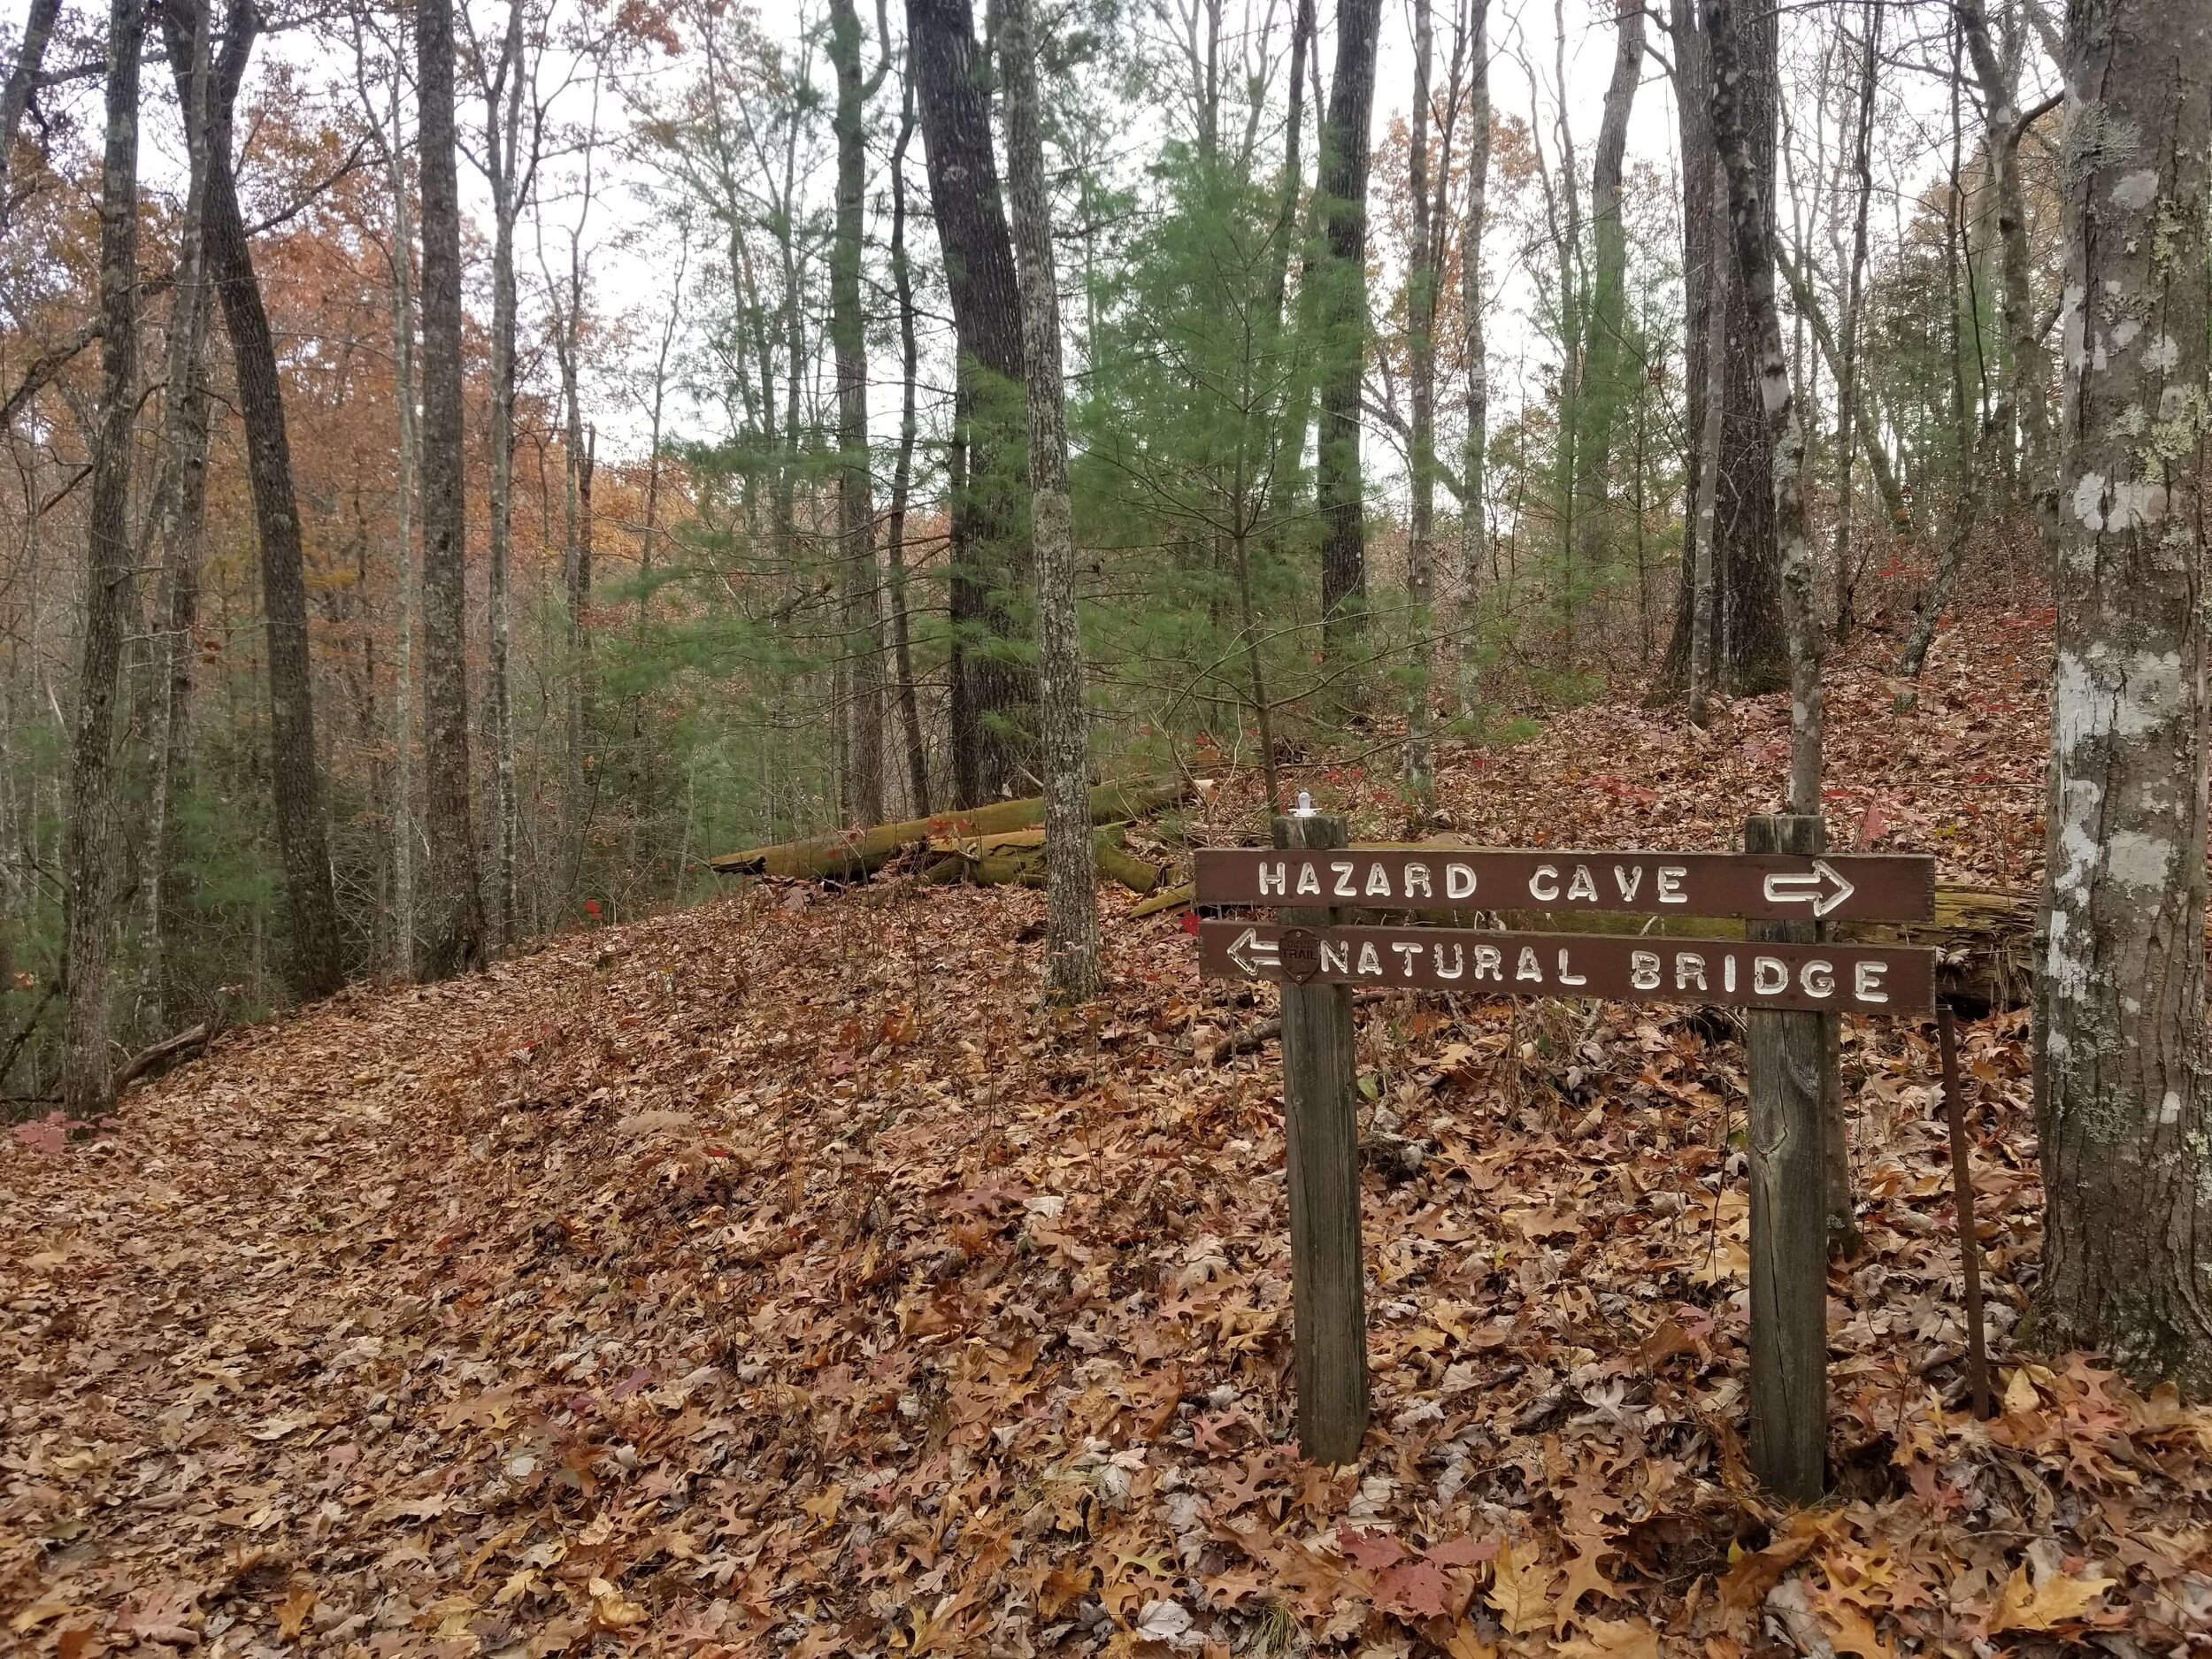 You can do Hazard Cave and Natural Bridge together in a roughly 2 mile hike